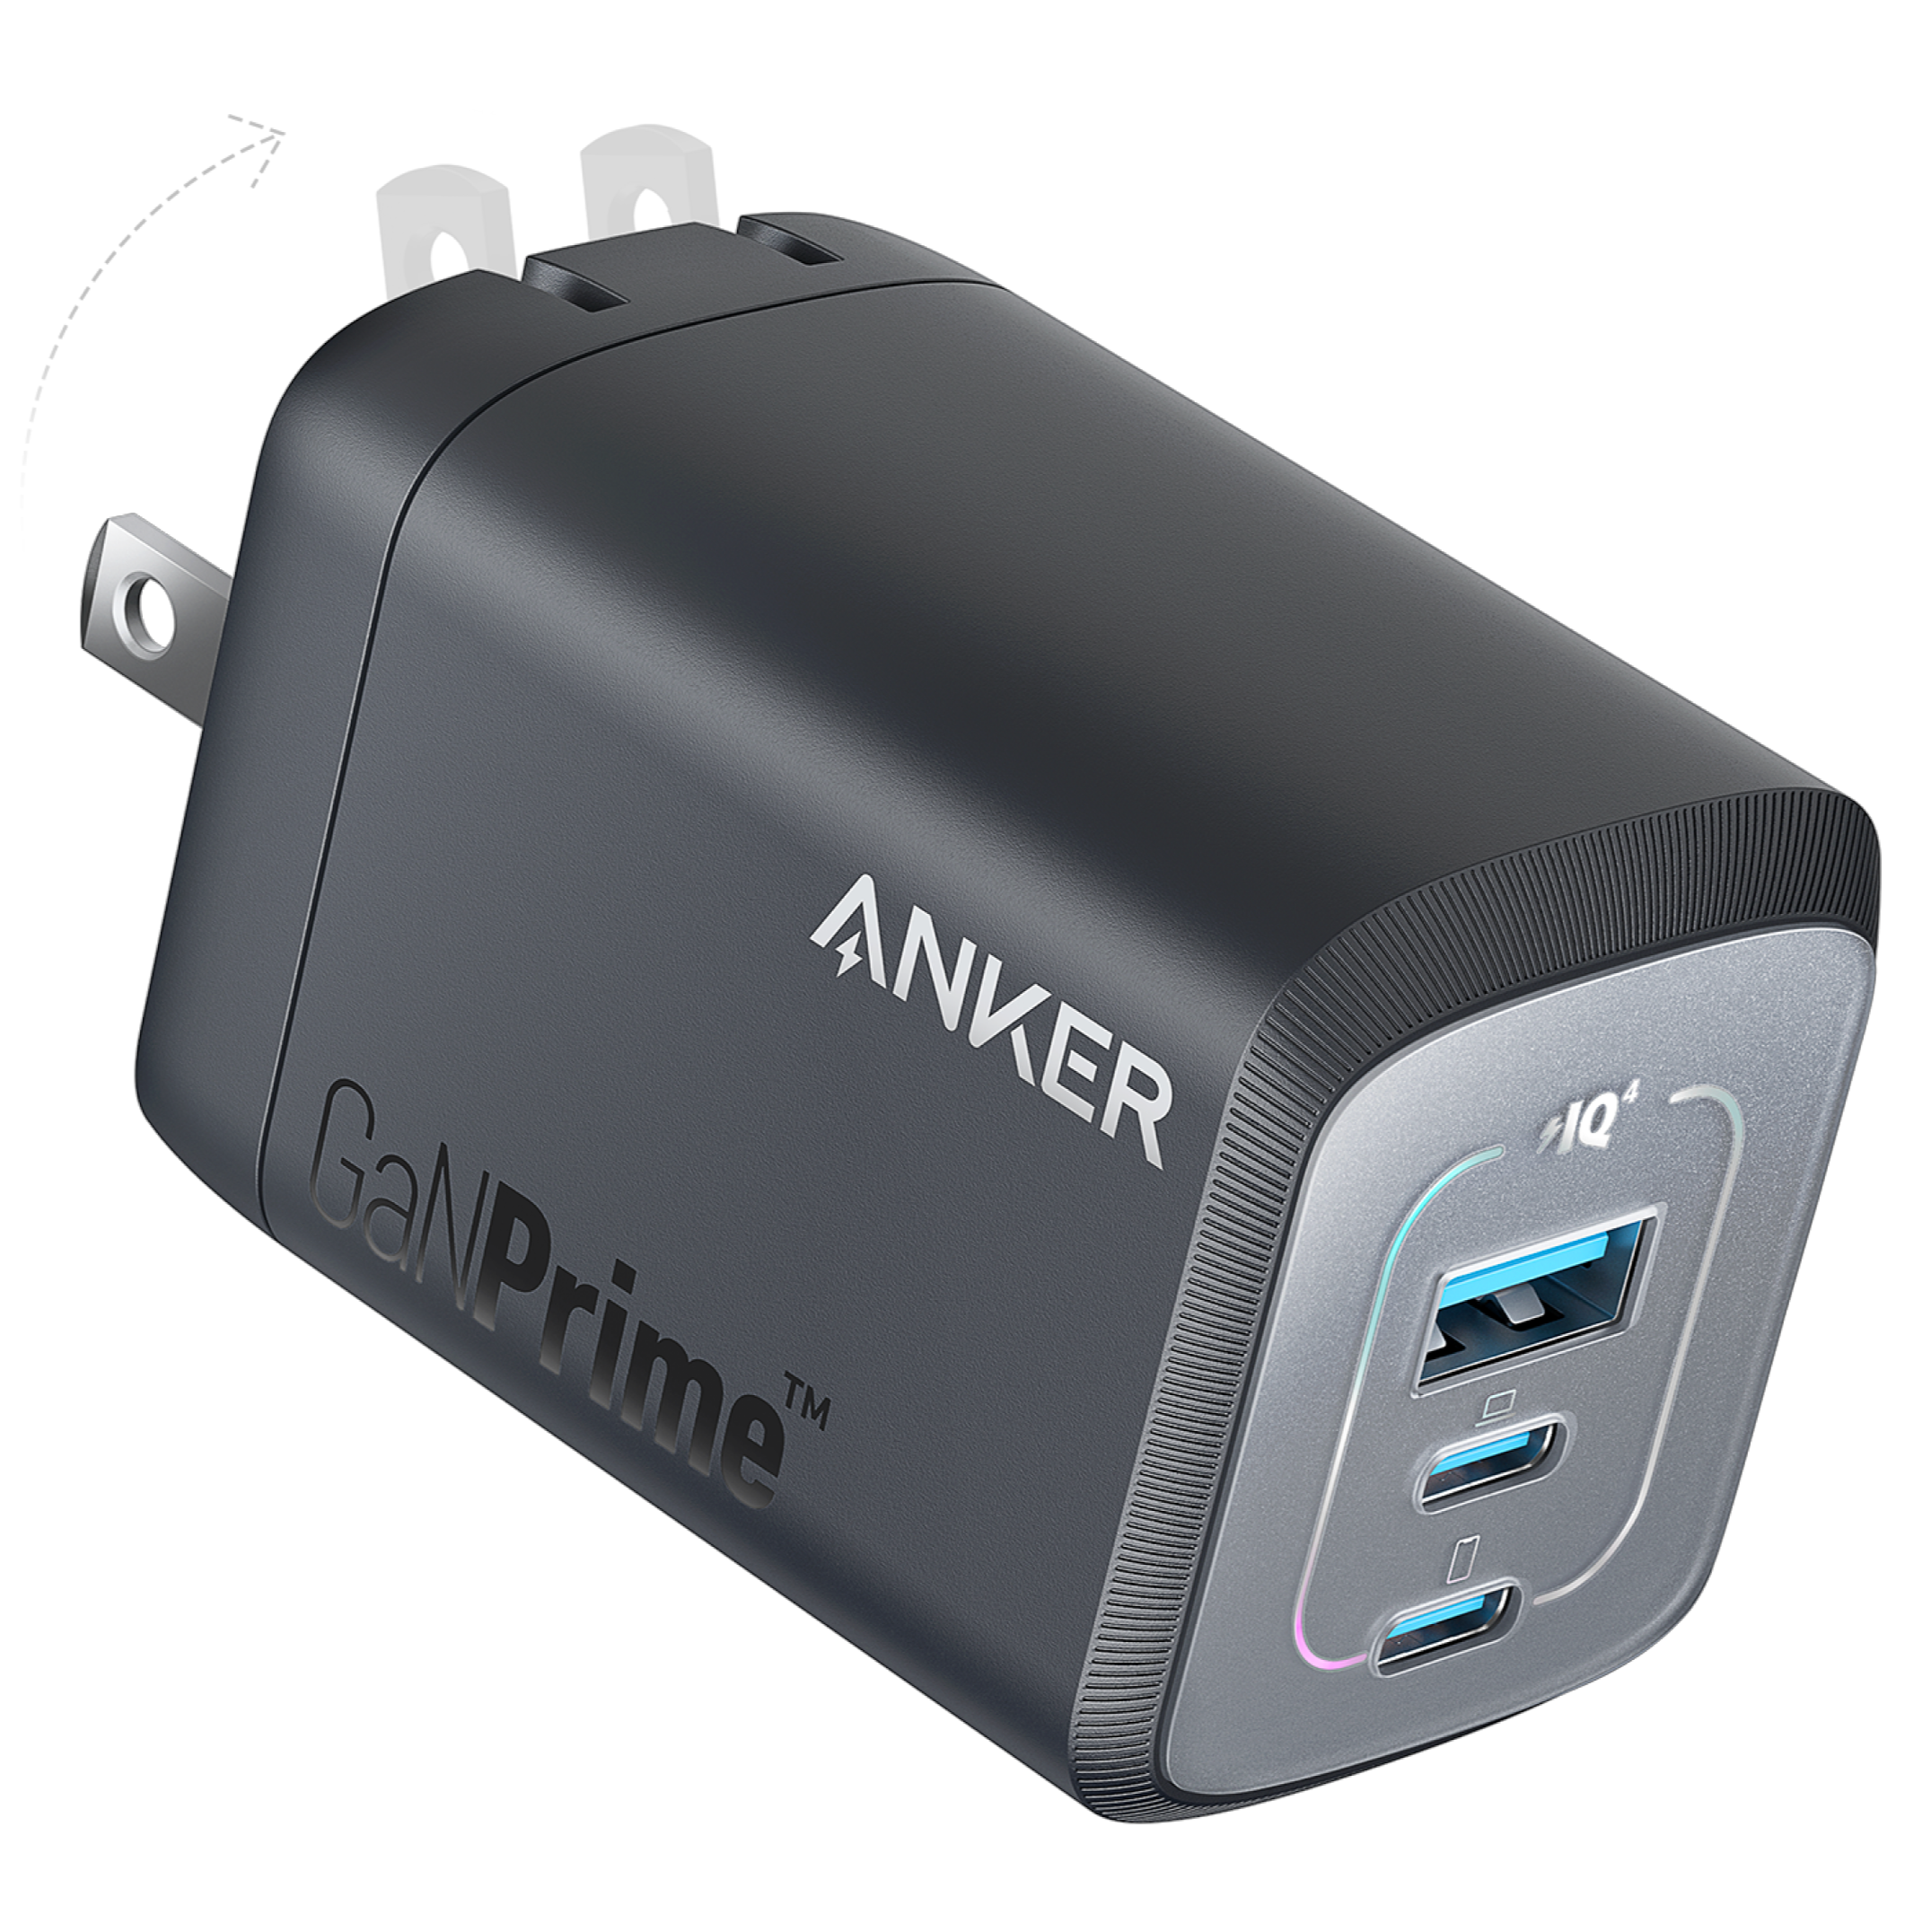 Anker Prime 20,000mAh Power Bank (200W) with 100W Charging Base - Anker US